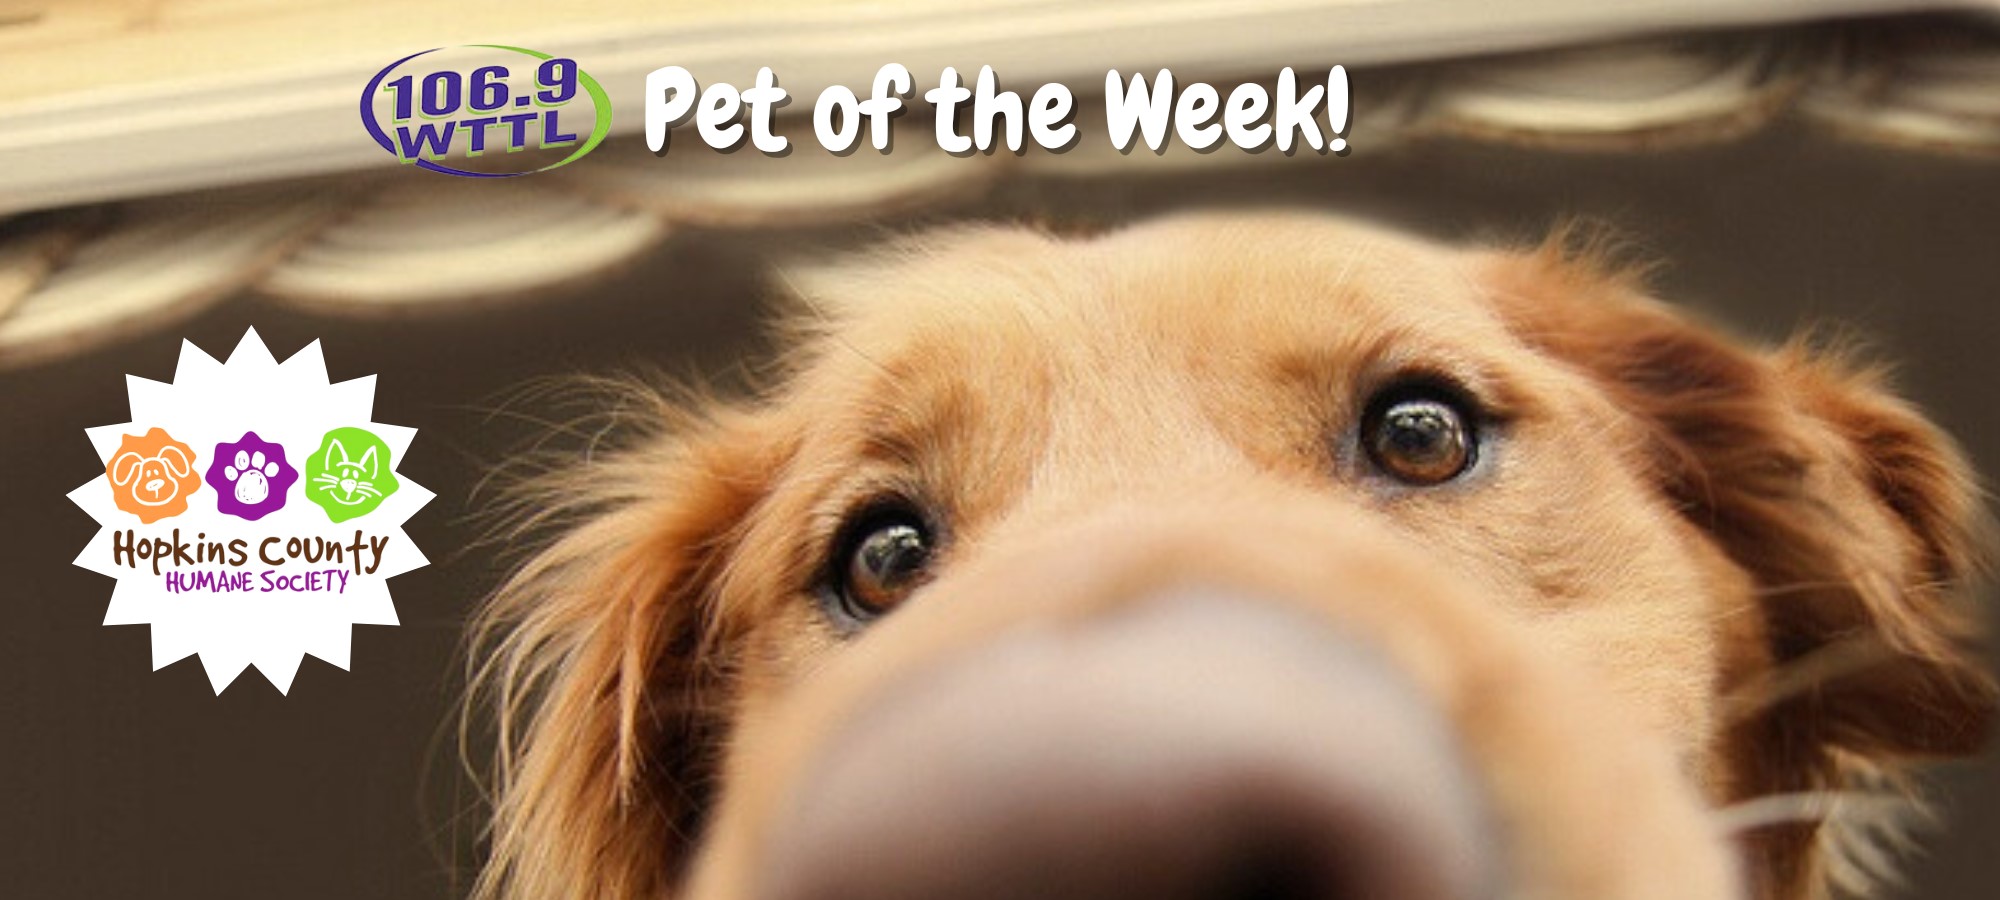 Hopkins County Humane Society’s Pet of the Week Monday, July 8